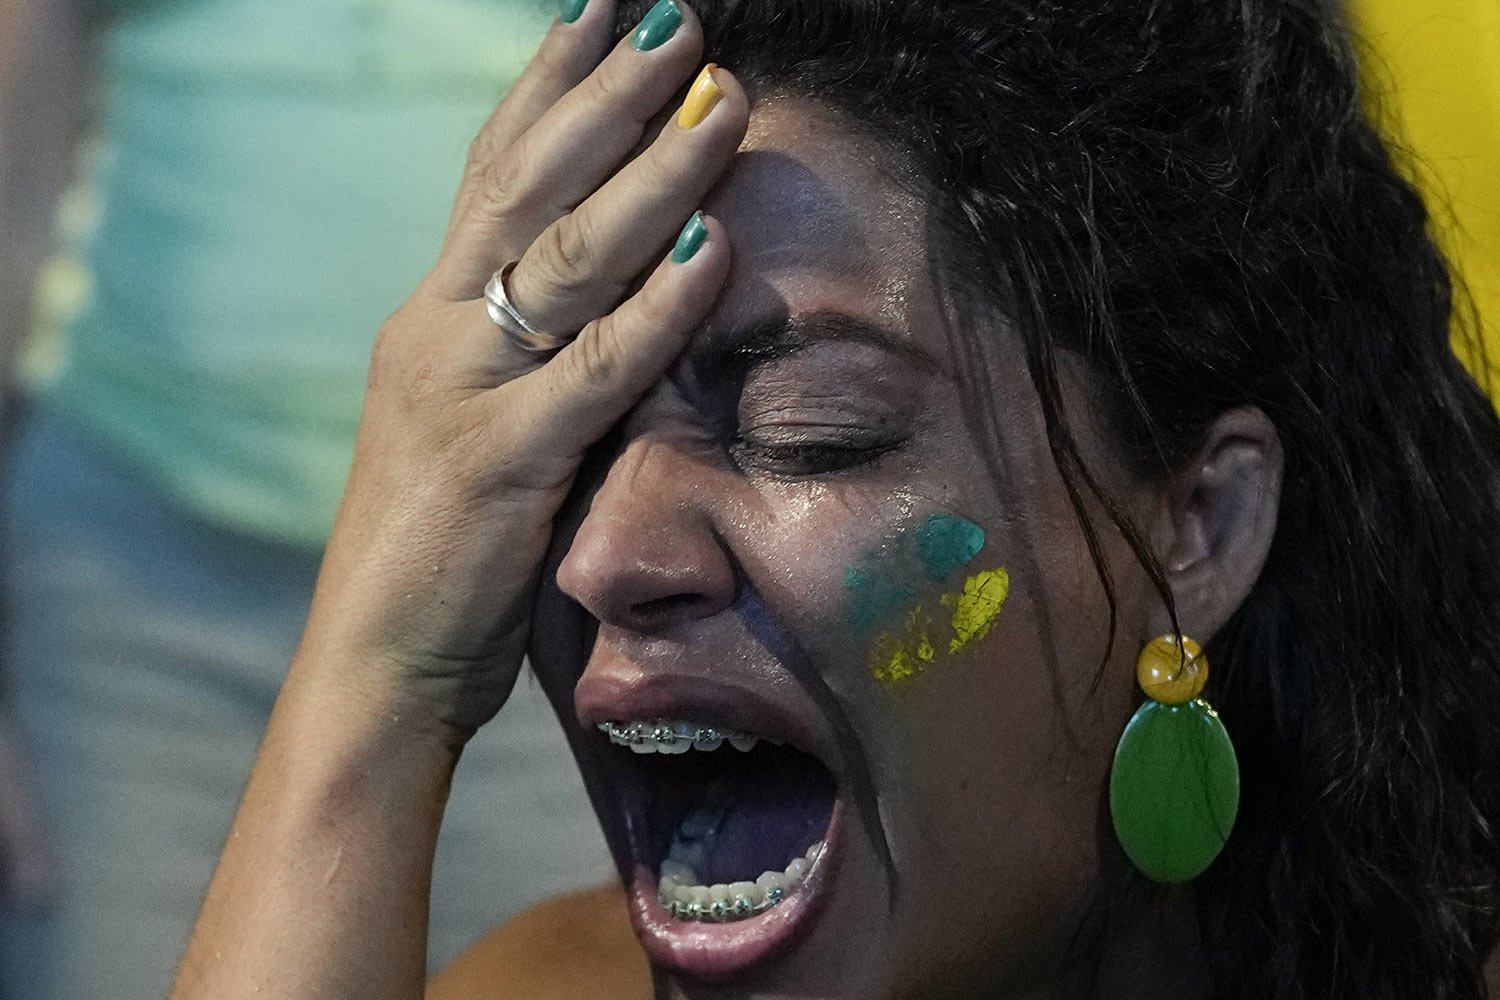  A supporter of incumbent President Jair Bolsonaro reacts to results after polls closed in a presidential run-off election, in Rio de Janeiro, Brazil, Sunday, Oct. 30, 2022. Brazil's electoral authority announced that former President Luiz Inacio Lul